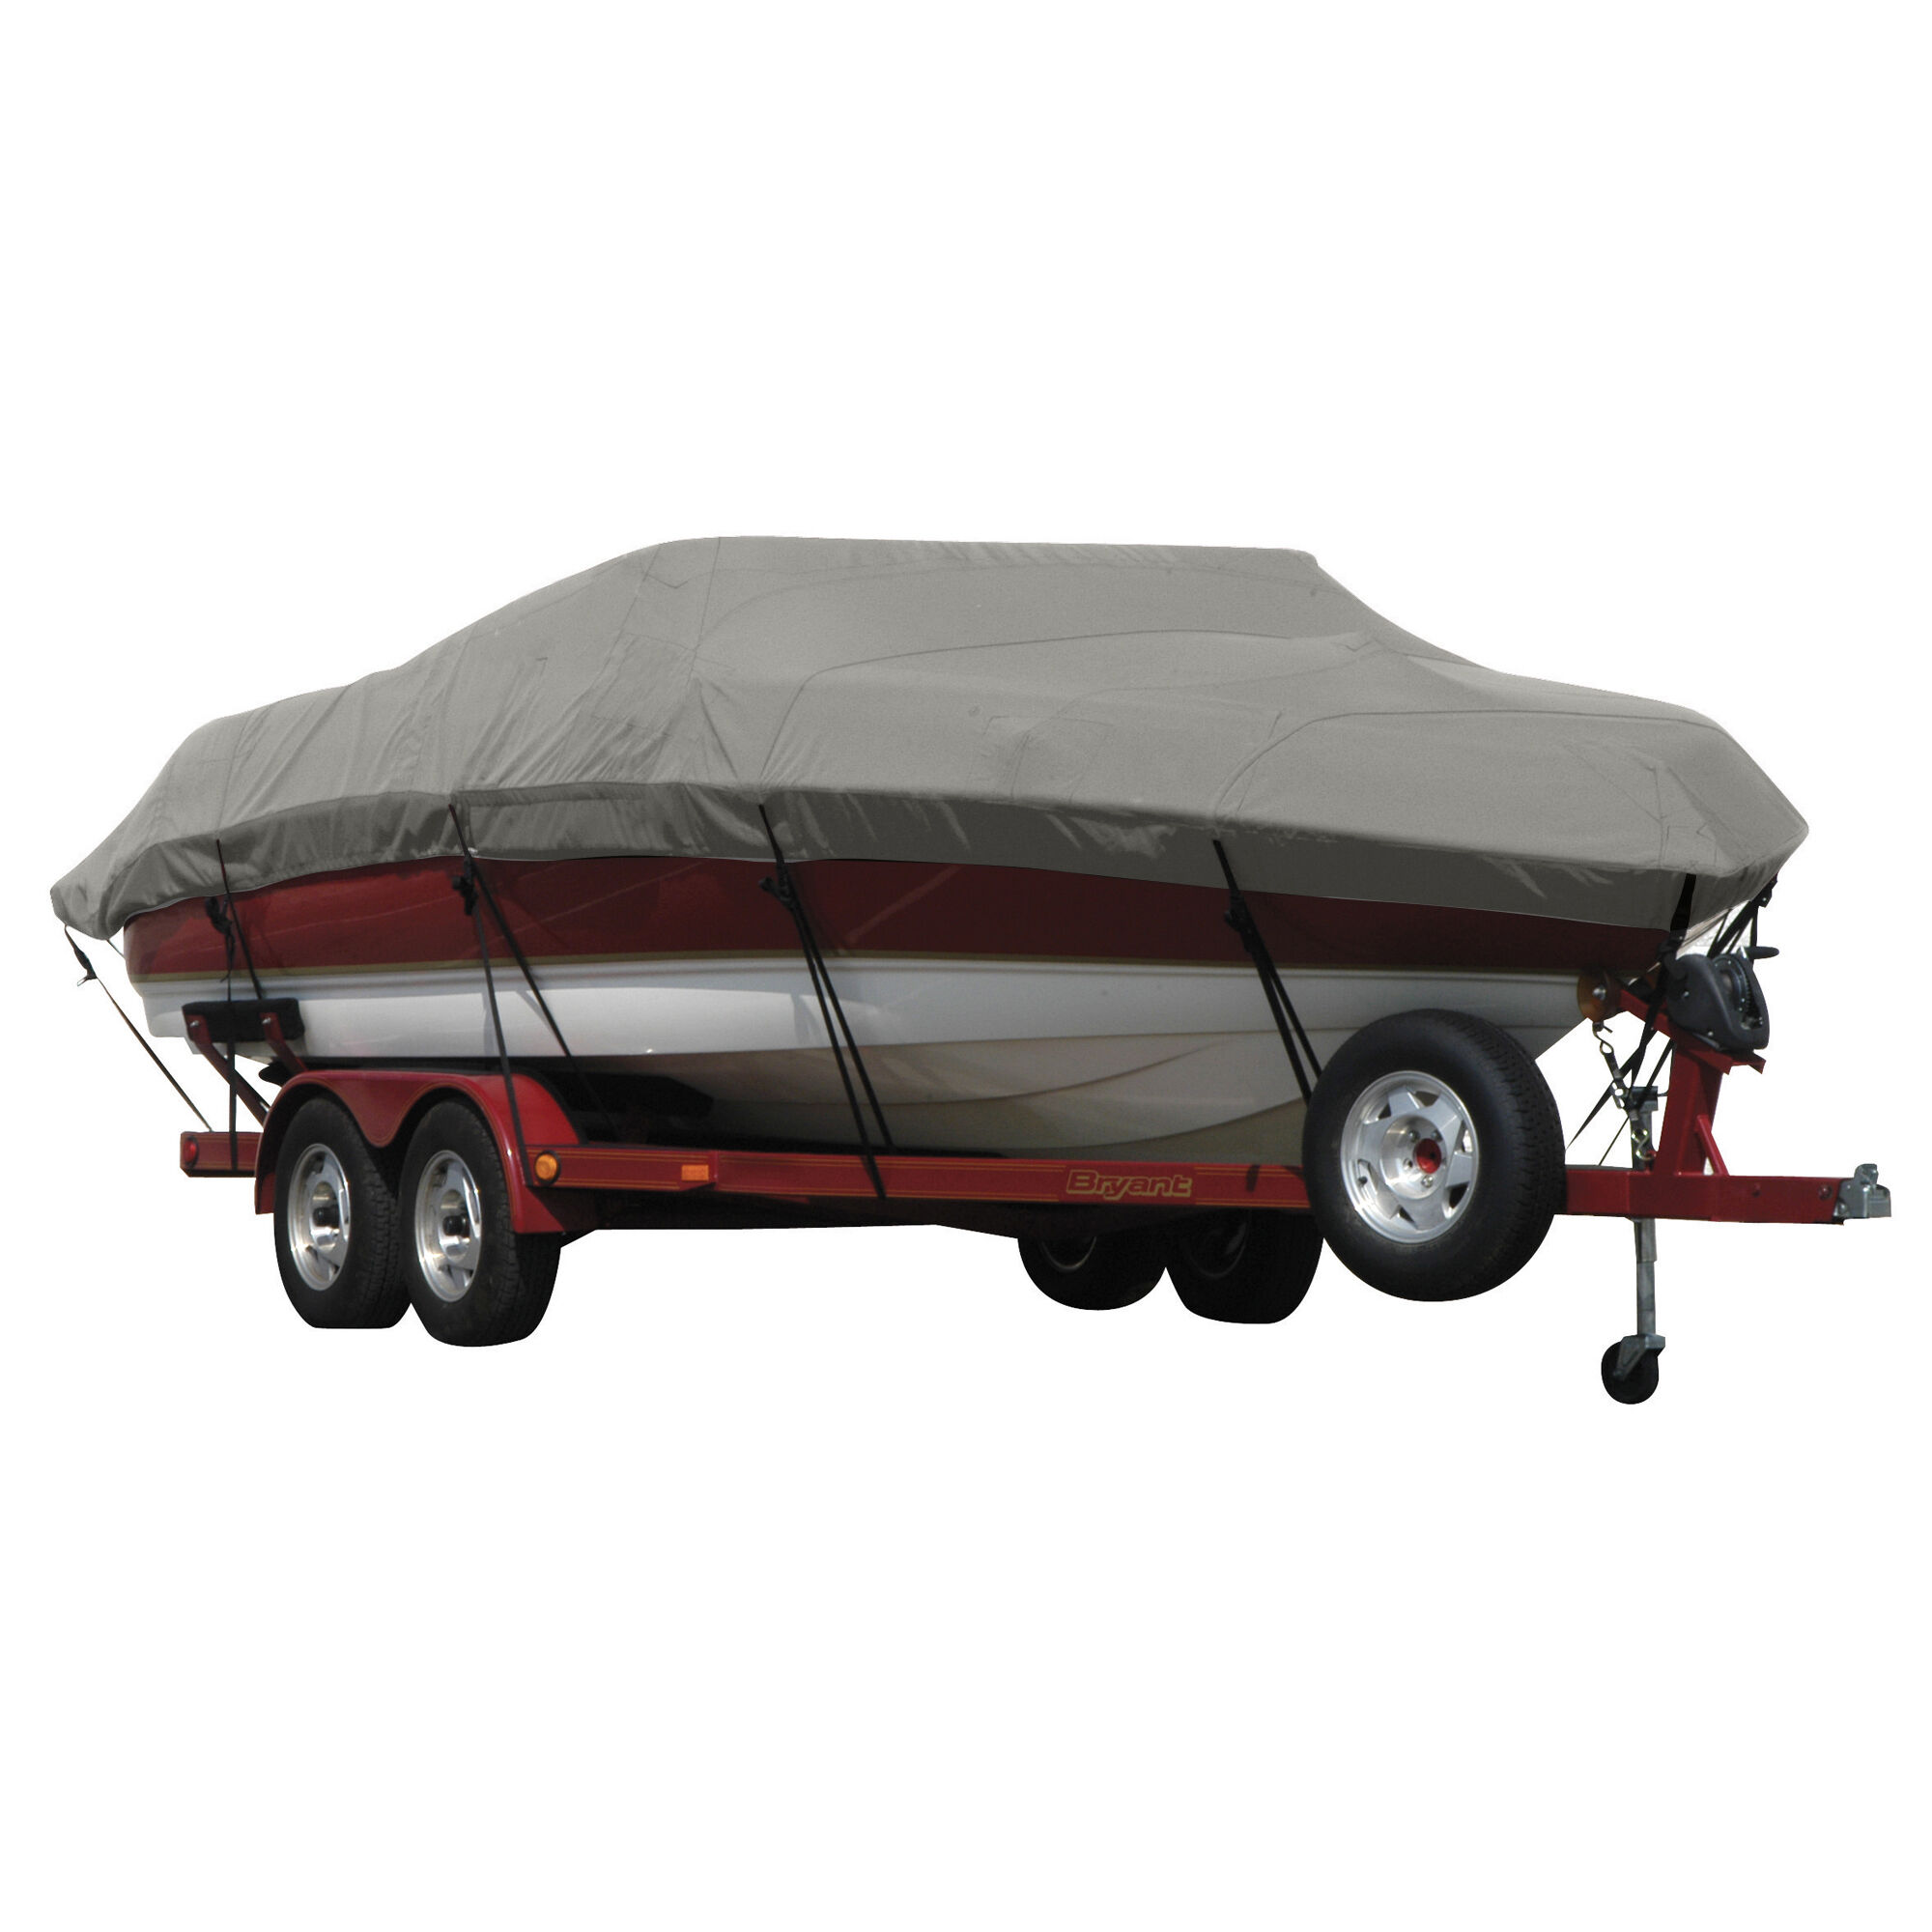 Covermate Exact Fit Sunbrella Boat Cover for Campion Chase 910 Zri Chase 910 Zri Cc I/O. Charcoal Grey Heather in Charcoal Grey Heather